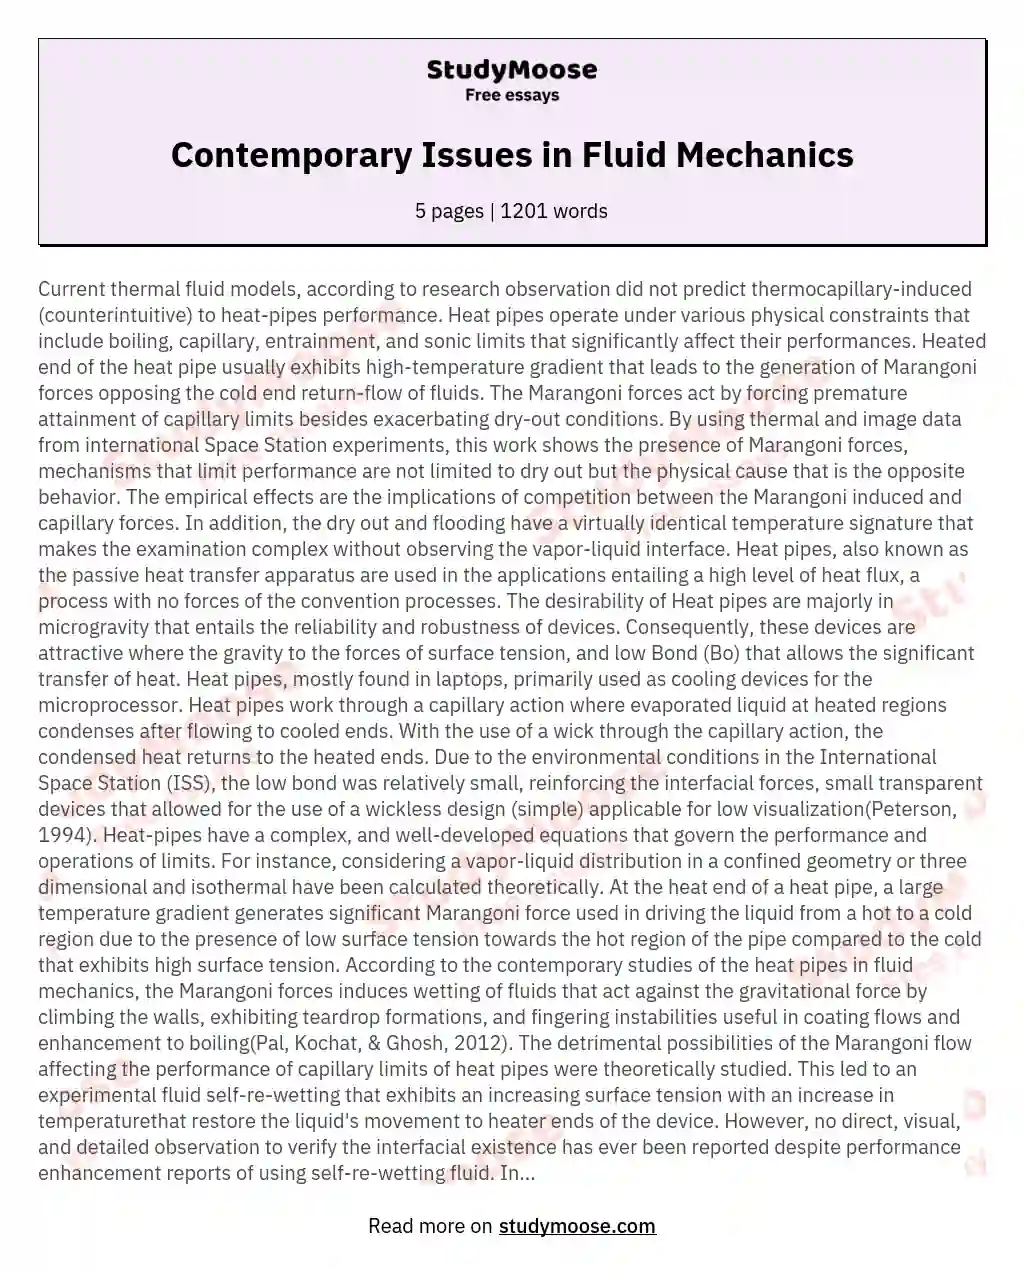 Contemporary Issues in Fluid Mechanics essay